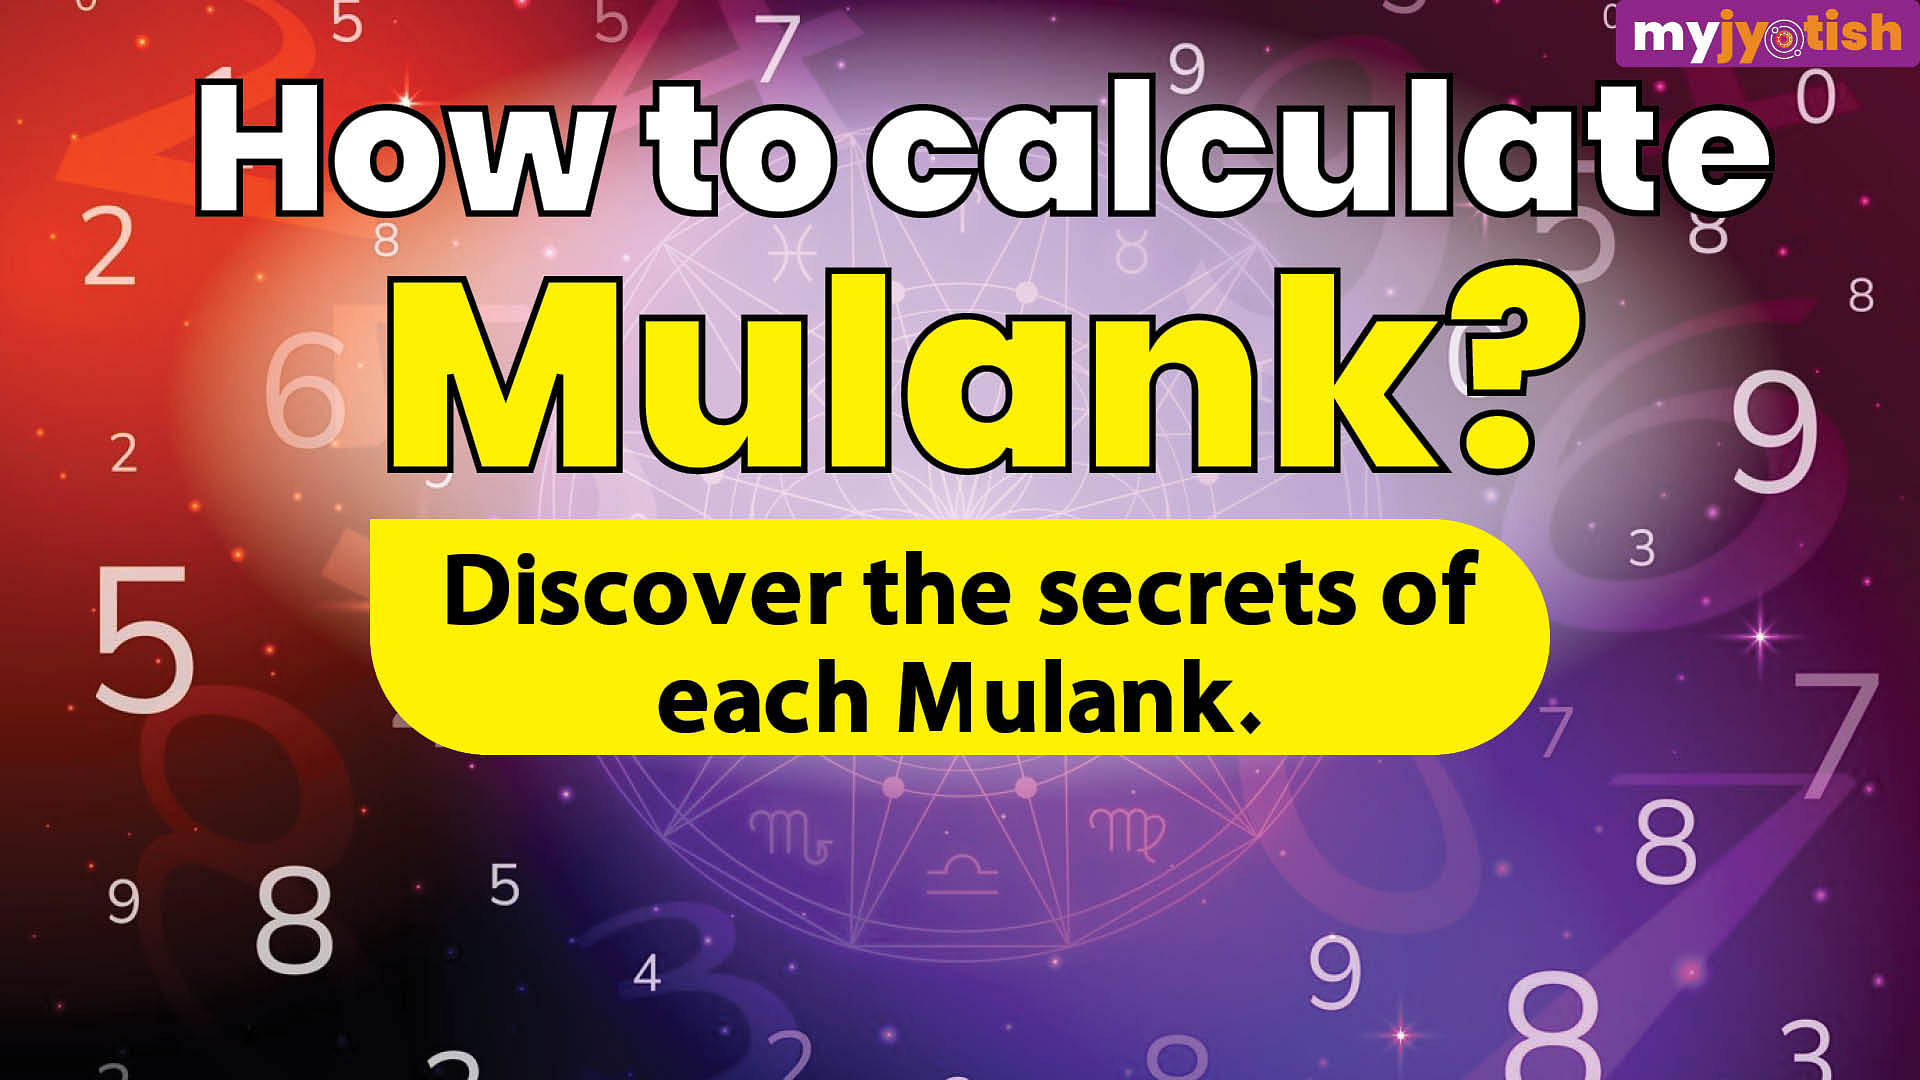 Discover the secrets of each Mulank